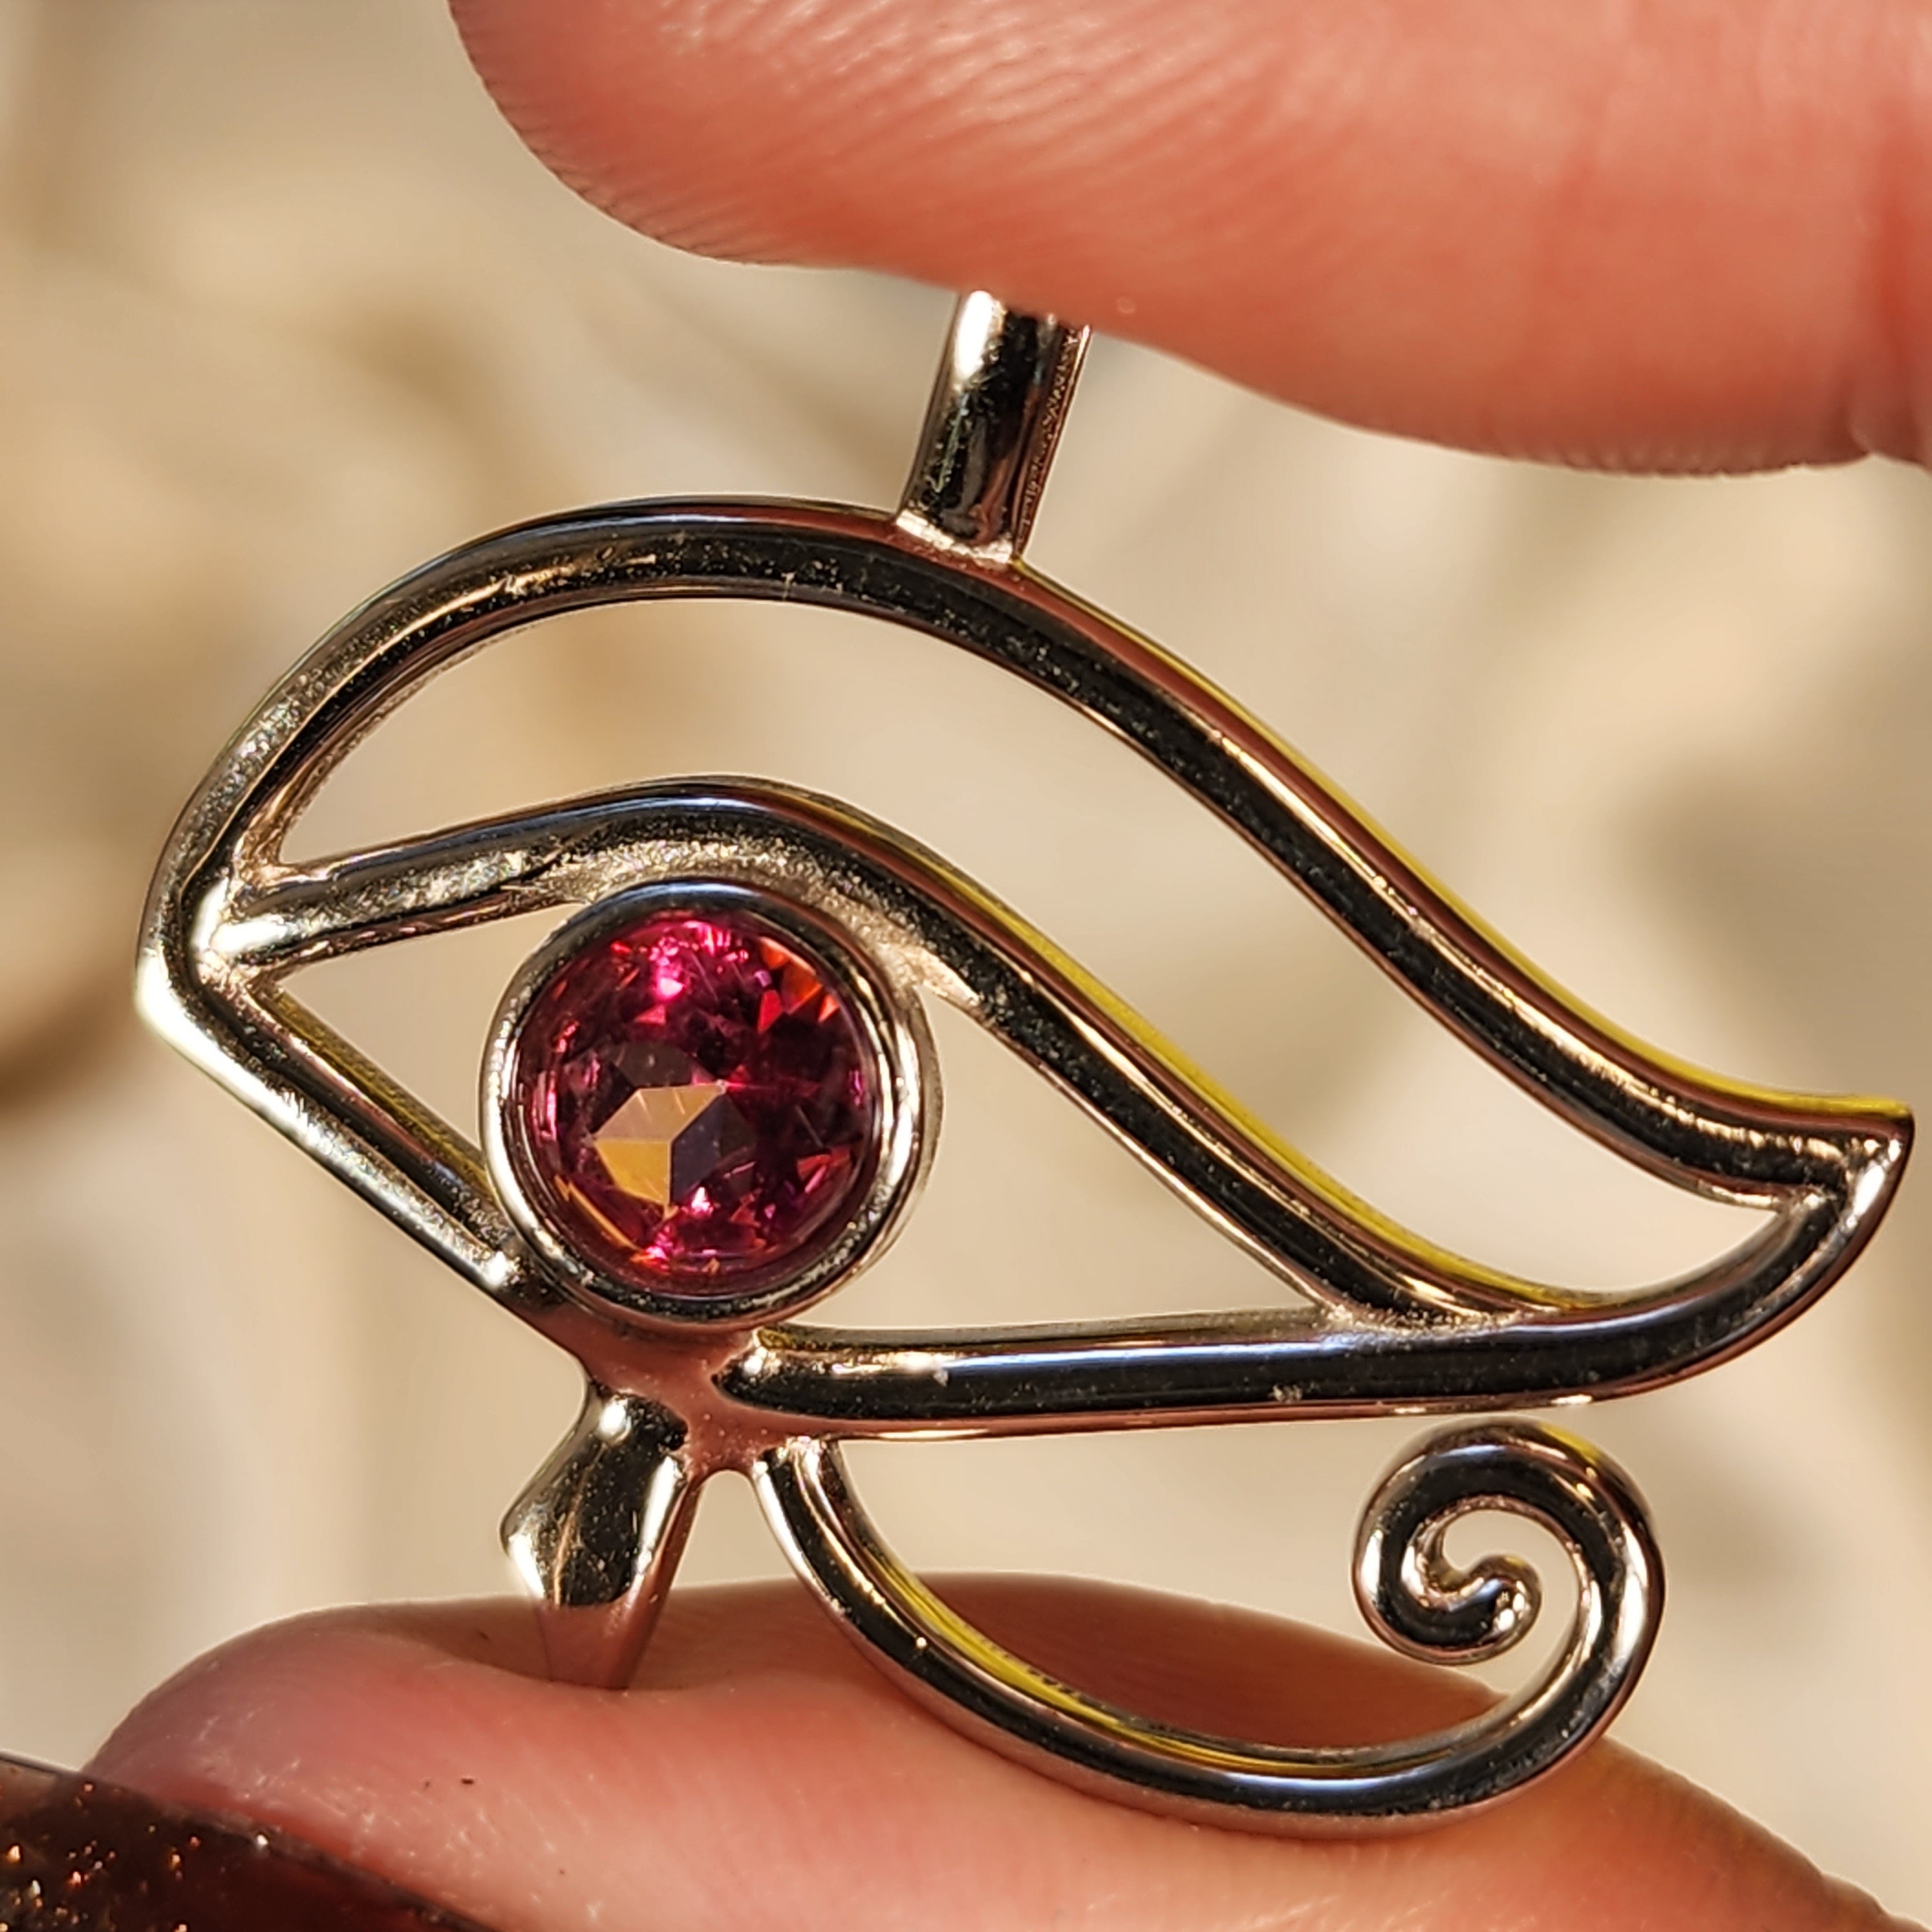 Pink Topaz Eye of Horus Amulet Pendant .925 Silver for Renewal, Healthy Relationships and Attracting Love